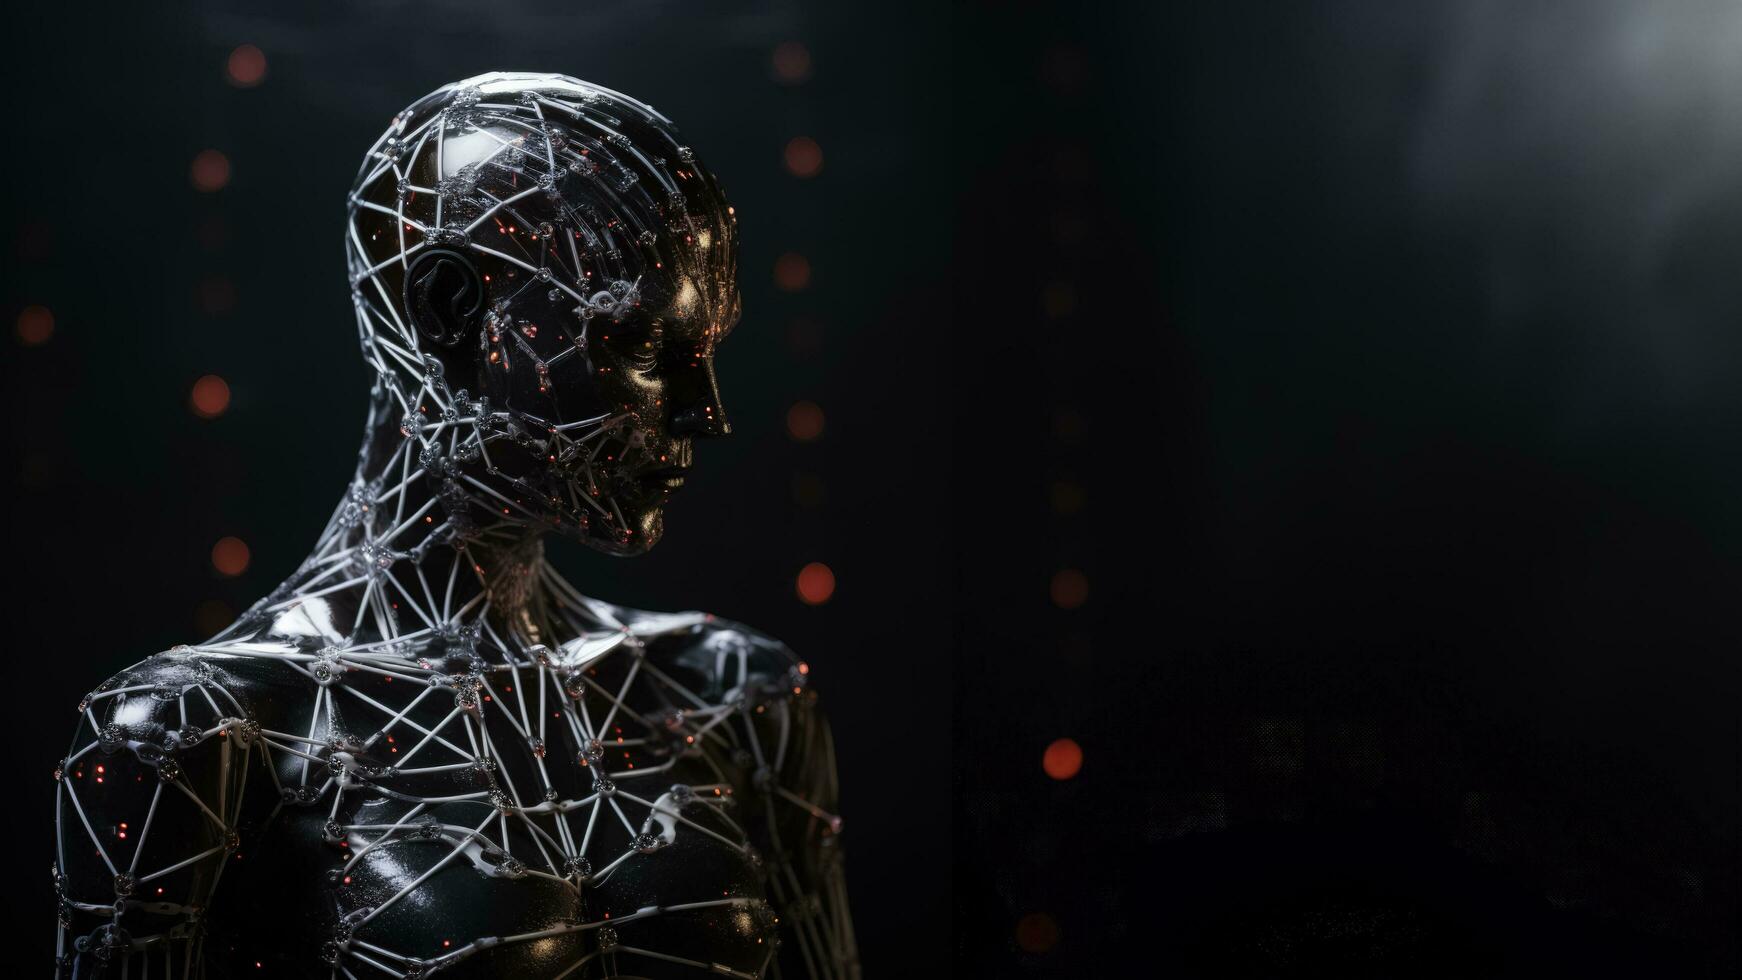 AI-driven robot hacker immersed within a web of radiant data connections photo